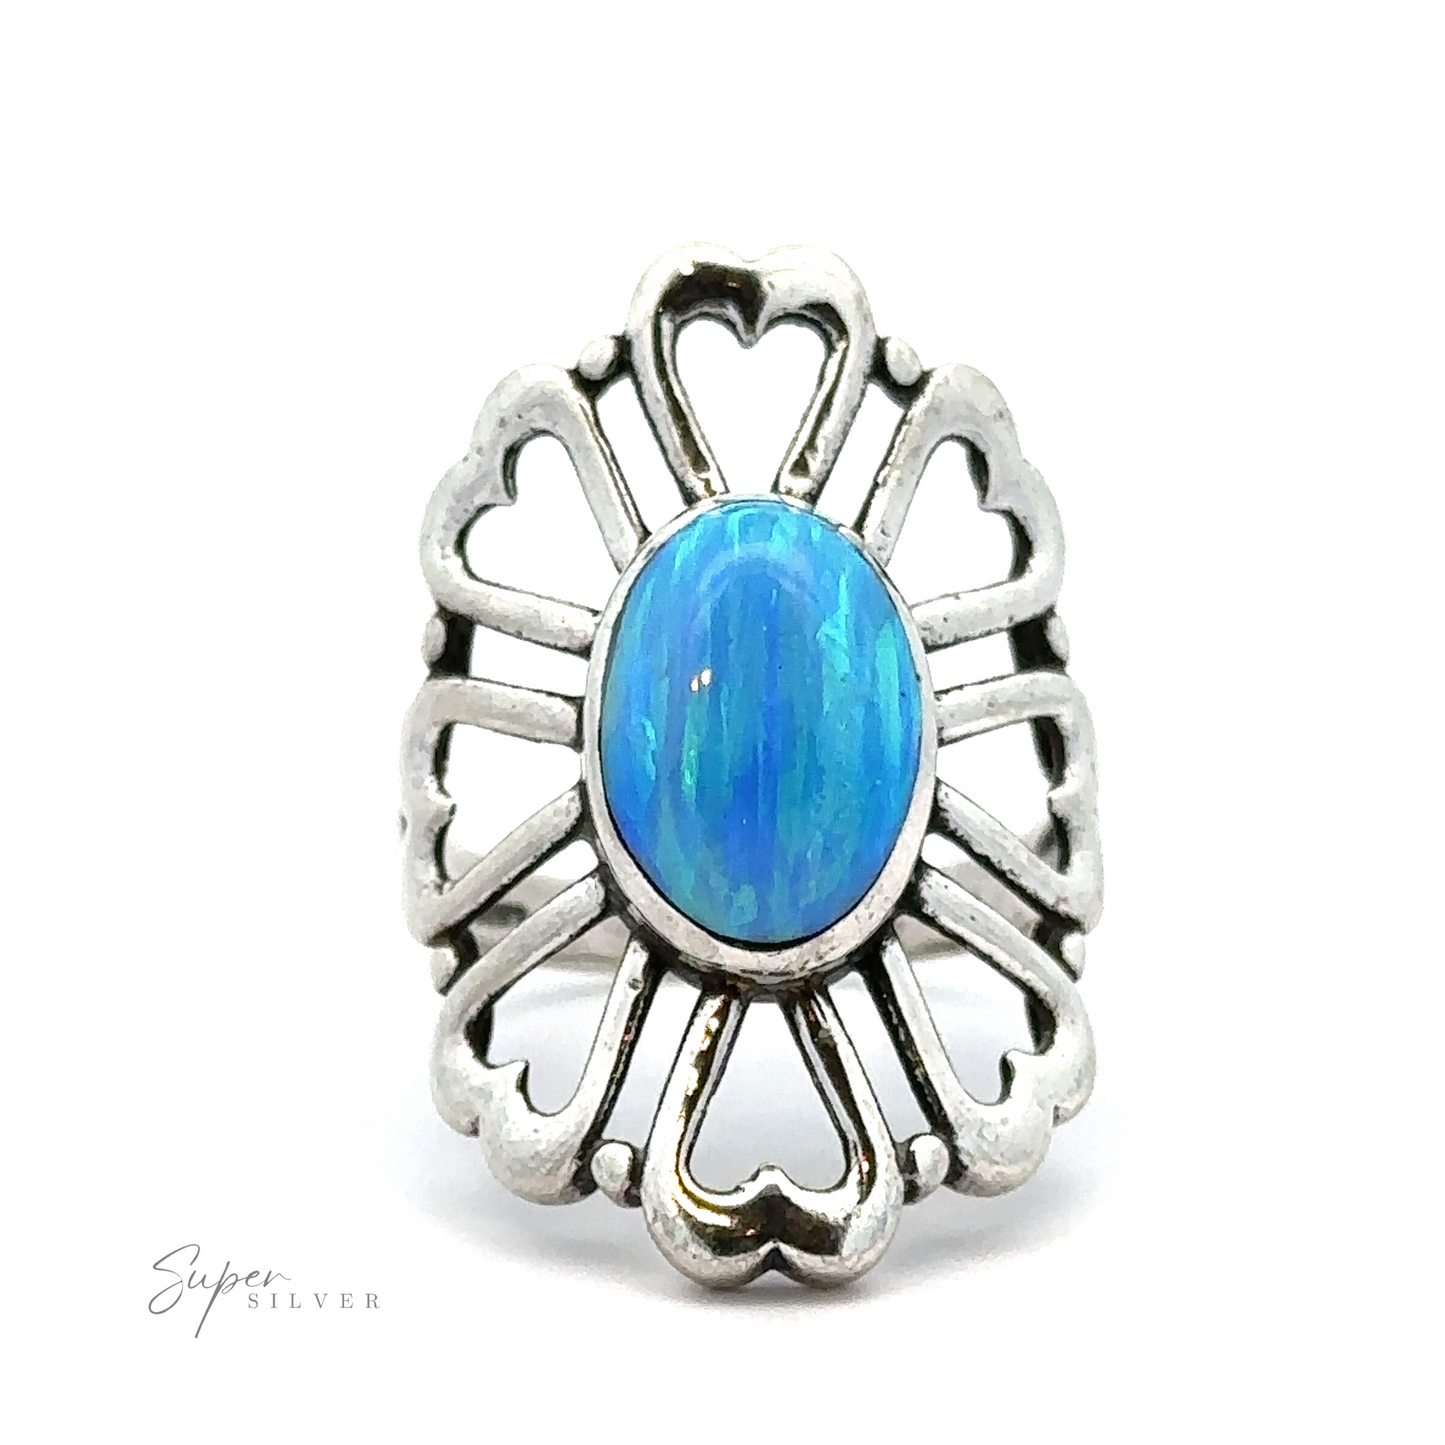 
                  
                    An American Made Opal Flower Ring with Heart Shaped Petals featuring a large oval blue gemstone at its center, surrounded by intricate heart-shaped cut-out designs. The words "Handcrafted in America" are visible in the lower left corner.
                  
                